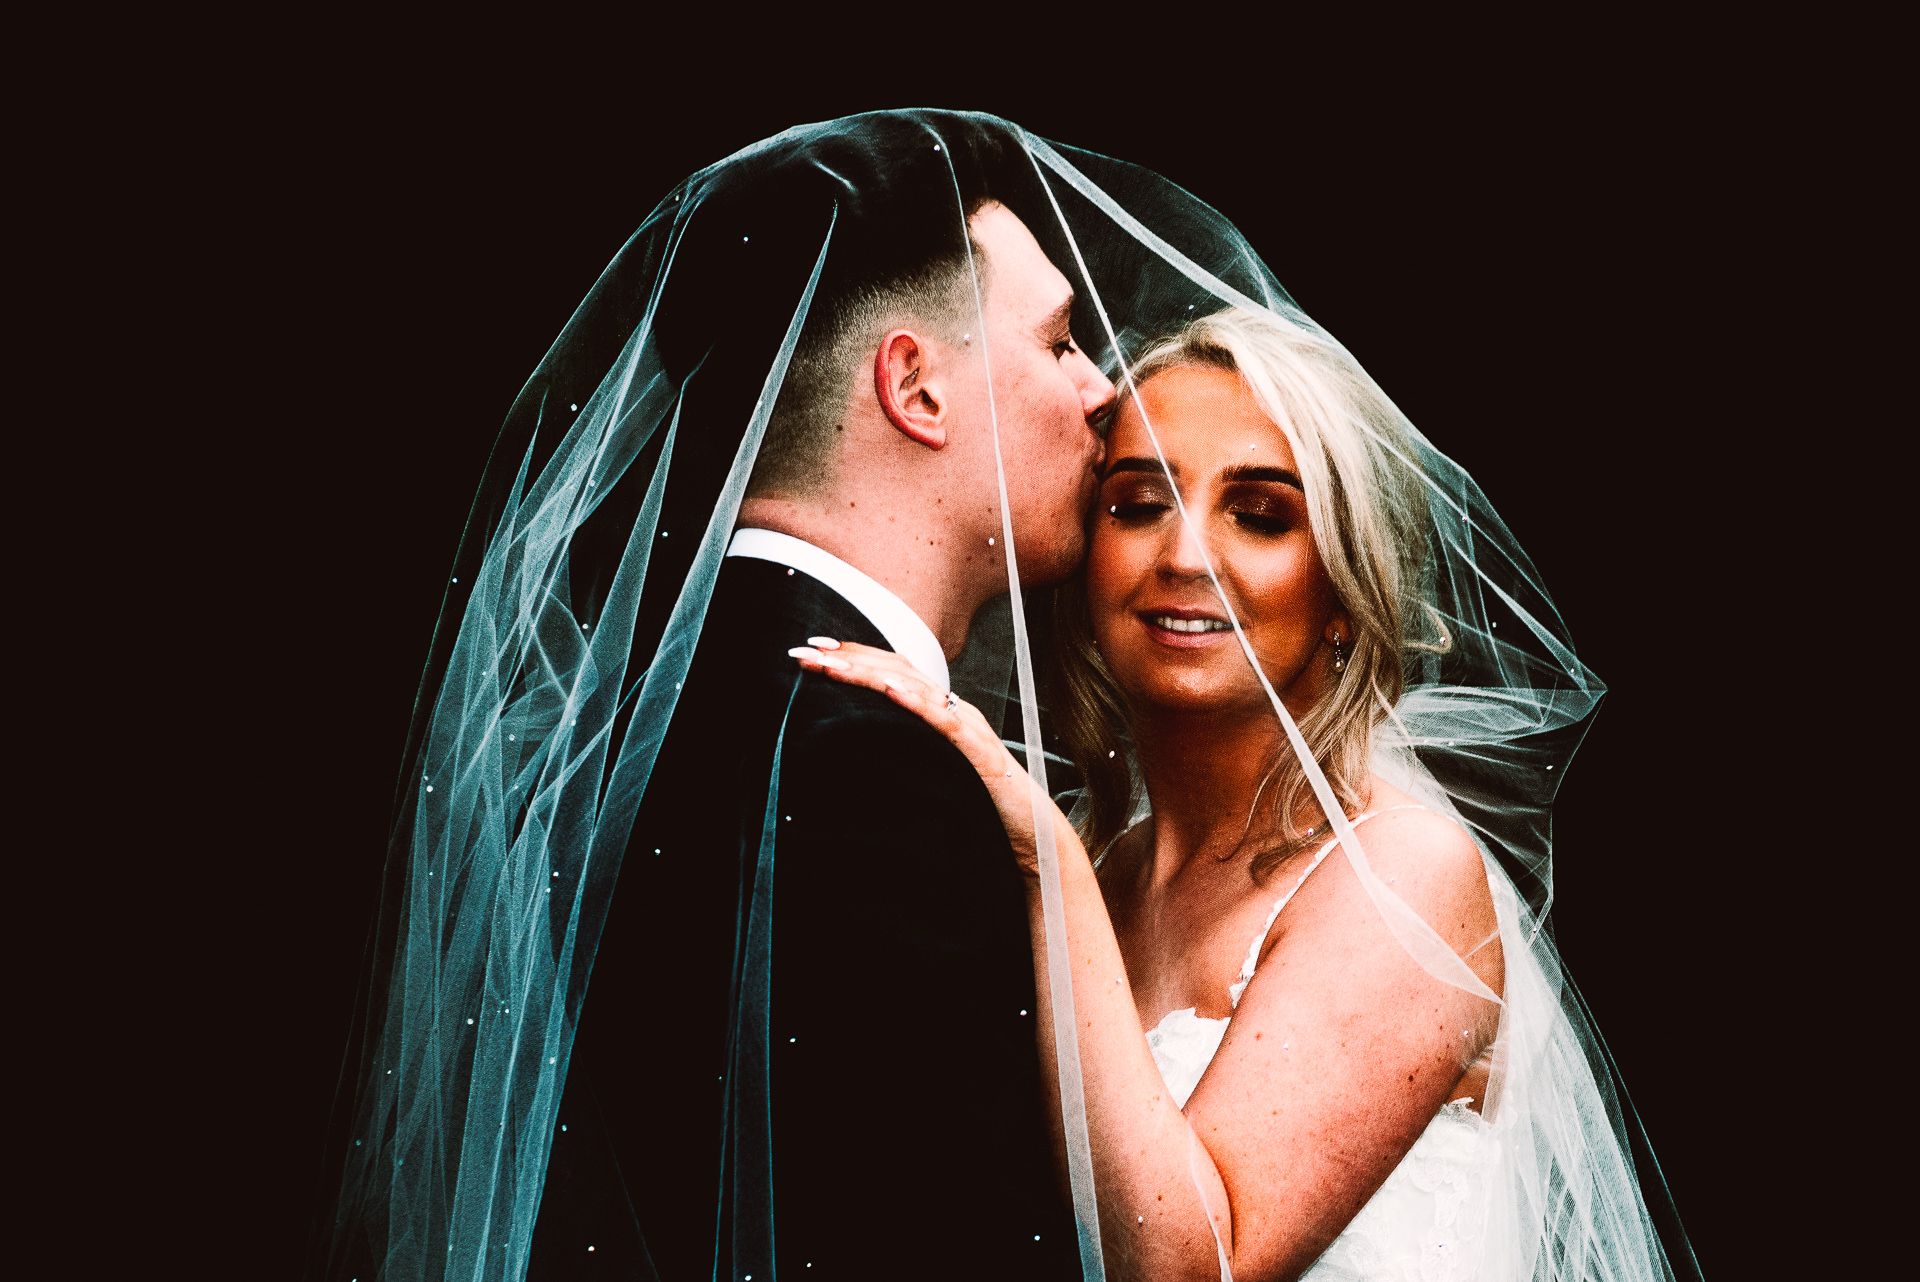 bride closes her eyes as she embraces the groom under her veil